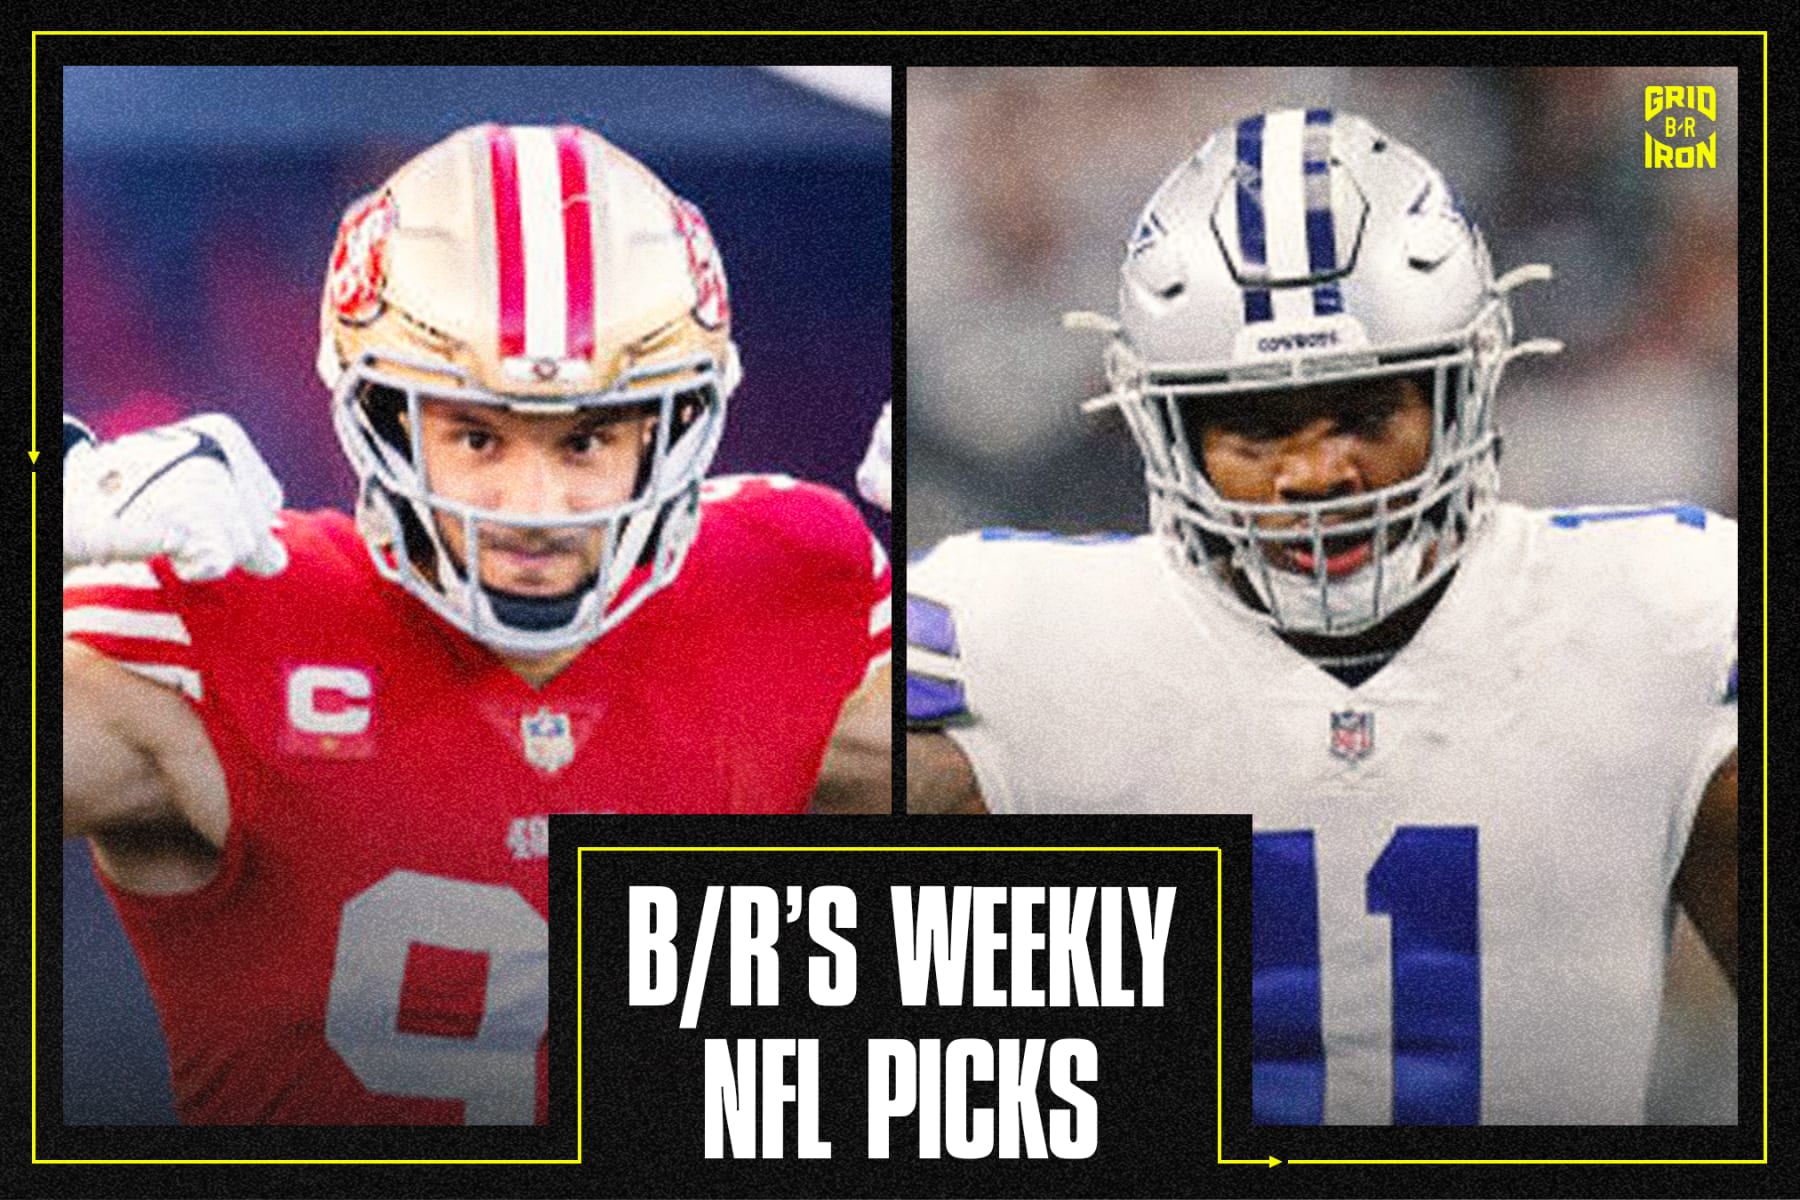 NFL Week 4 Picks Straight Up - Predicted Upsets and Underdogs Showing Value